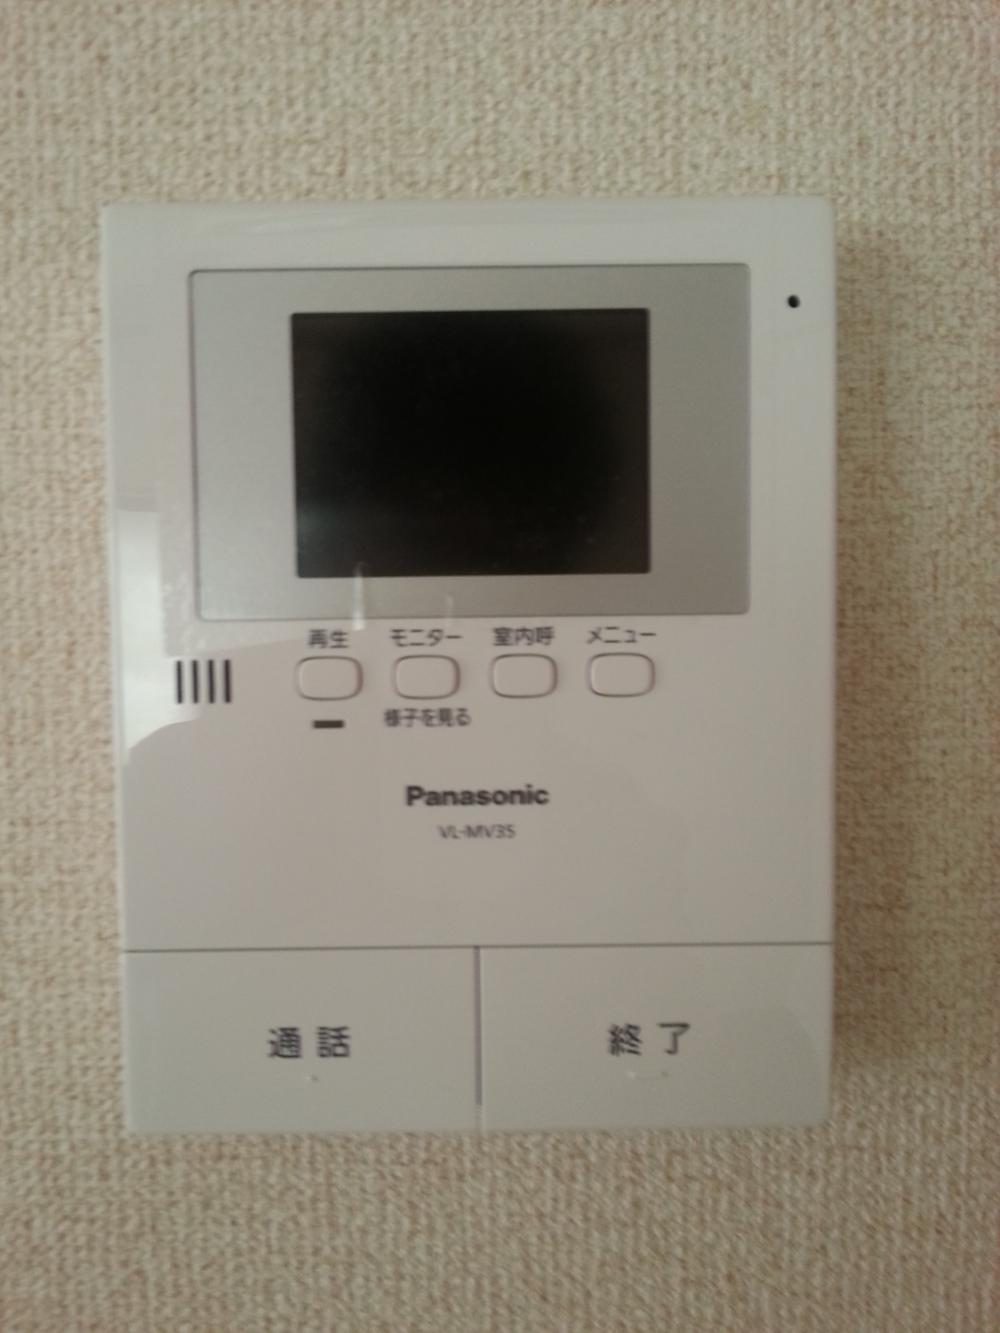 Same specifications photos (Other introspection). Color monitor with intercom